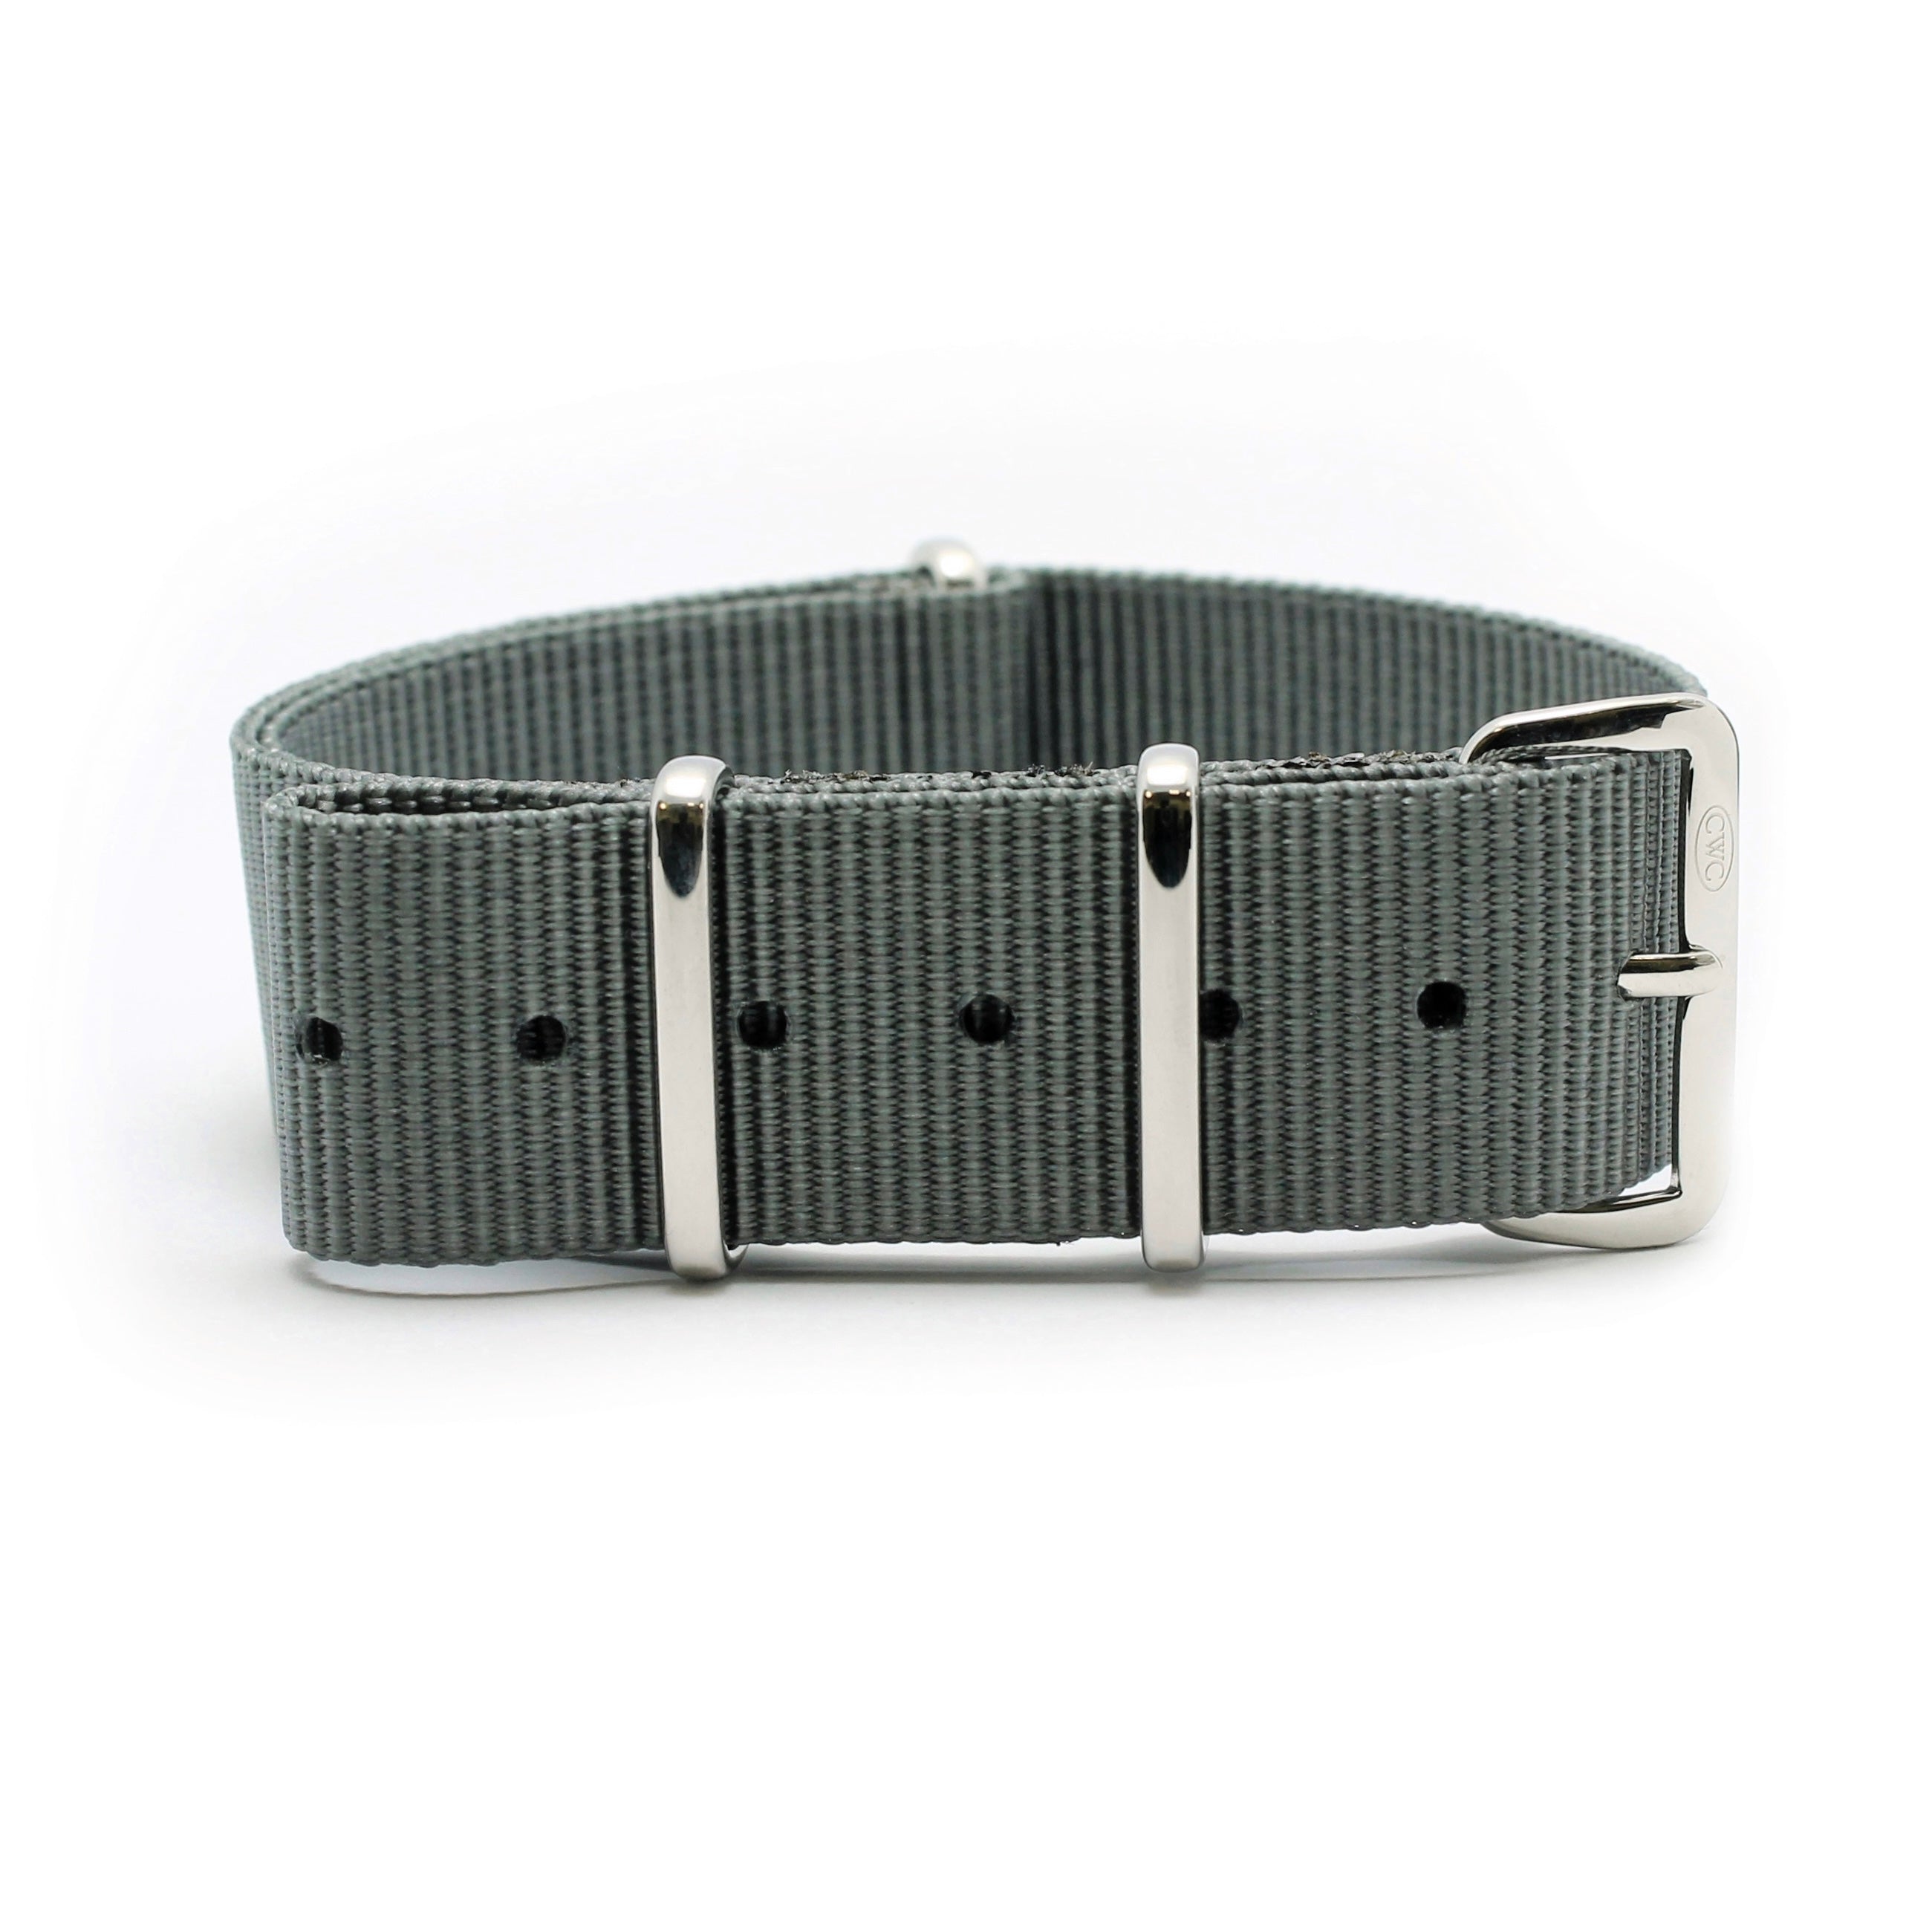 CABOT MILITARY WATCH STRAP - MILITARY GREY WITH GLOSS SILVER BUCKLE